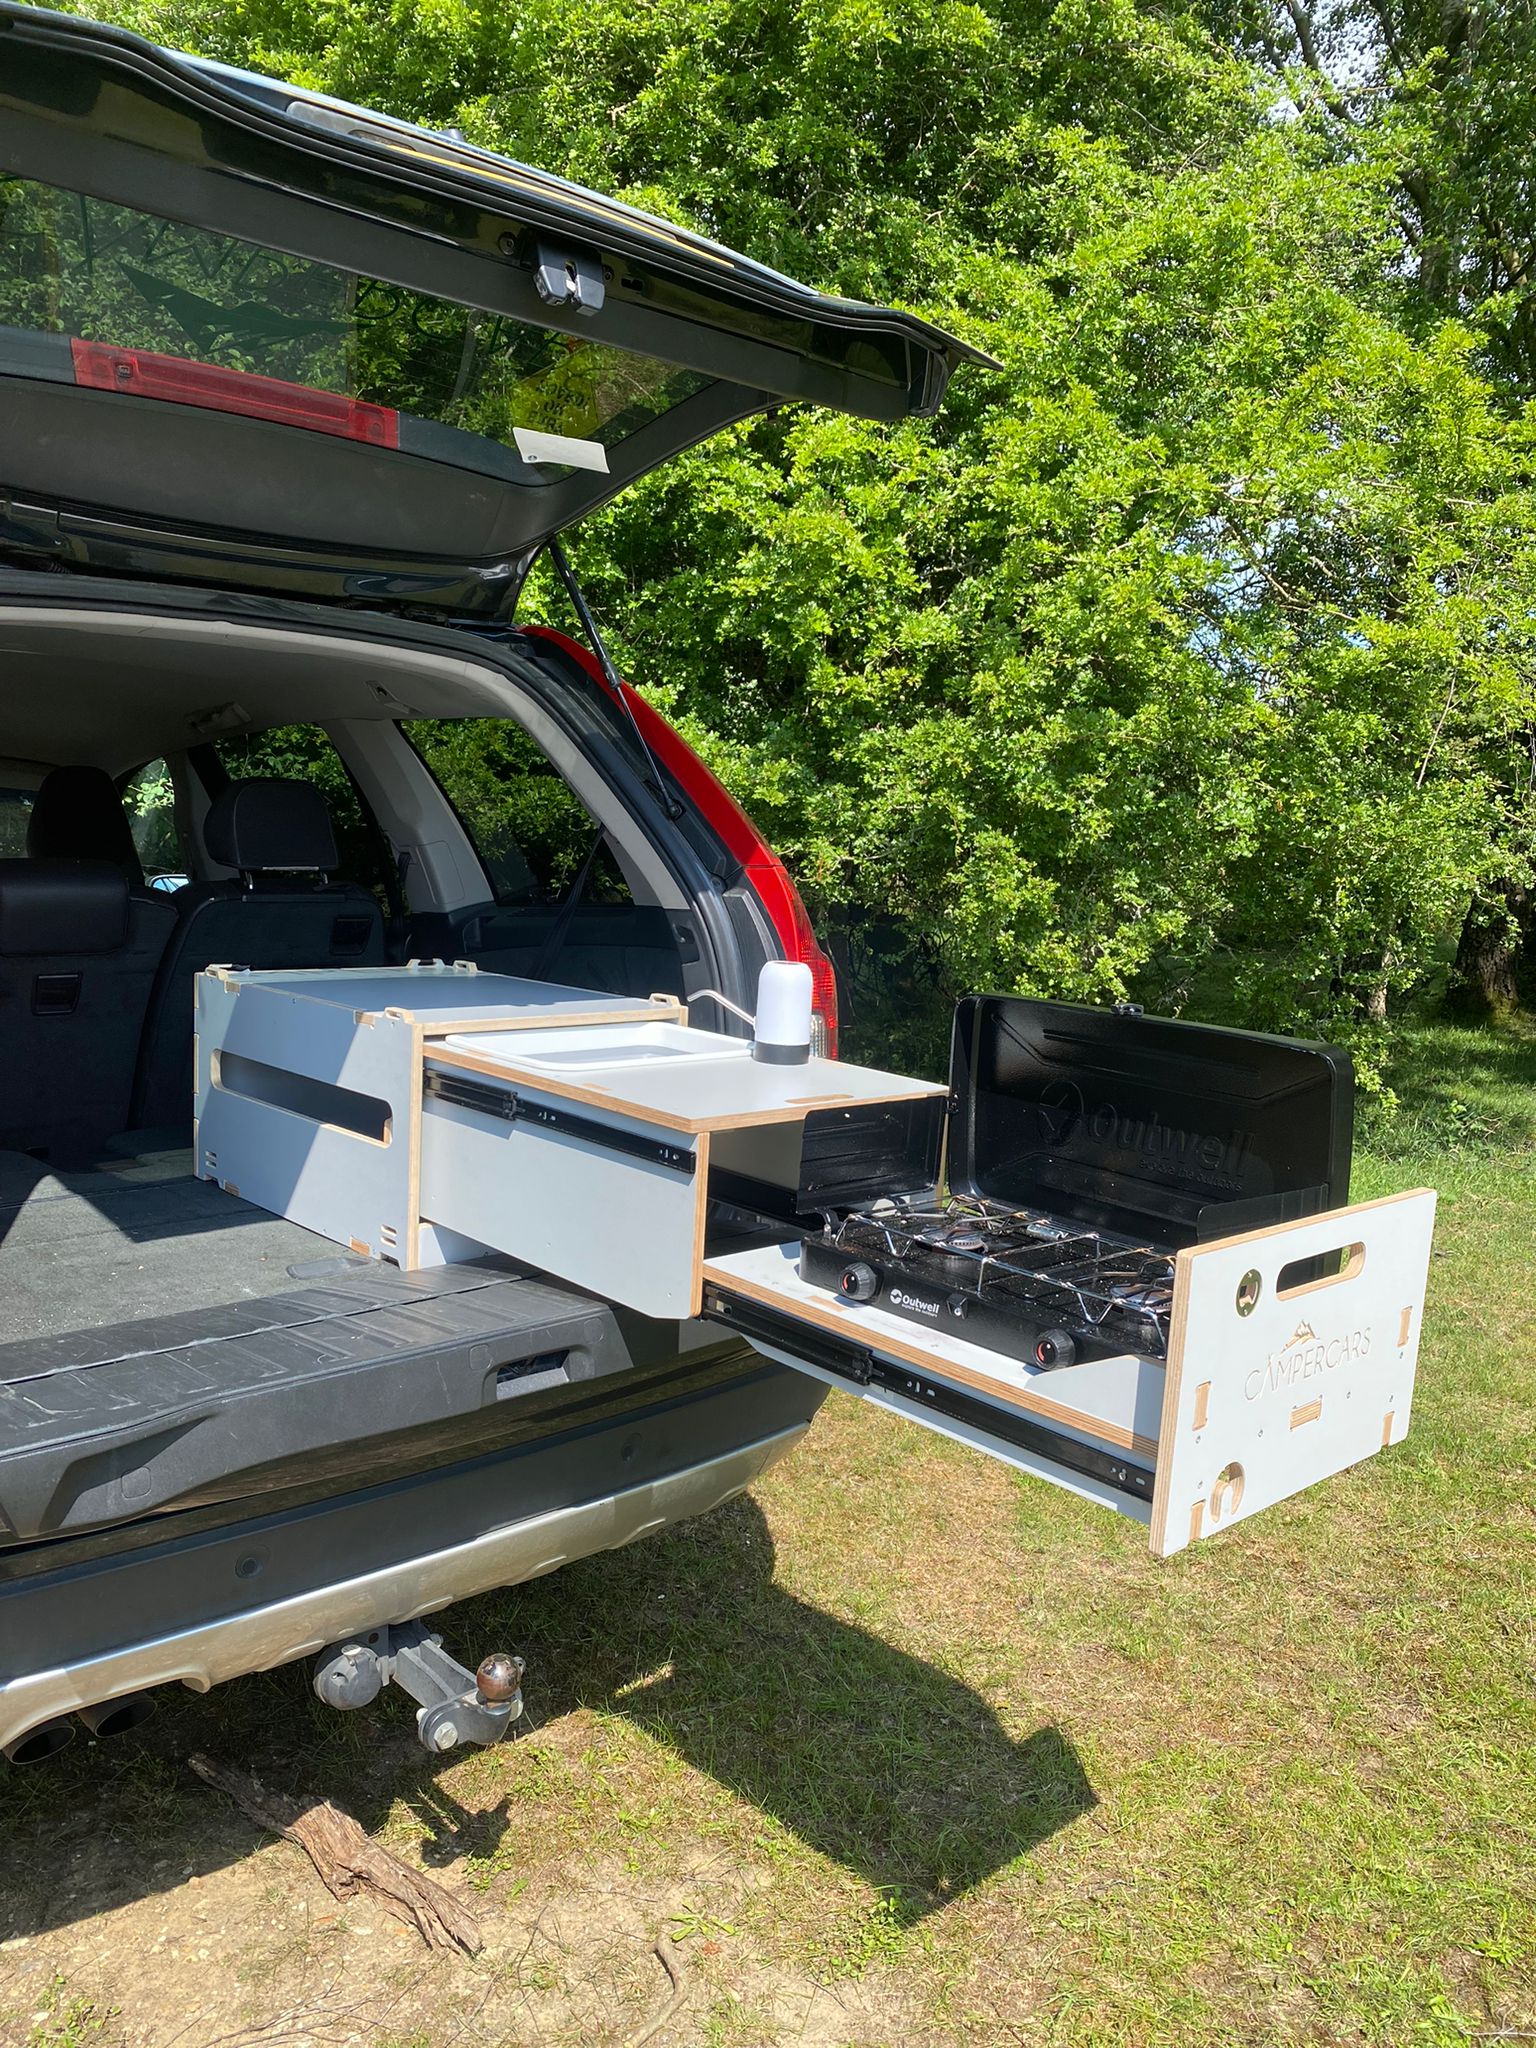 CampCook - Removable Car Kitchen - Camping and Car Kitchen Systems –  CamperCars - Removable Car Camping & Car Kitchen Systems